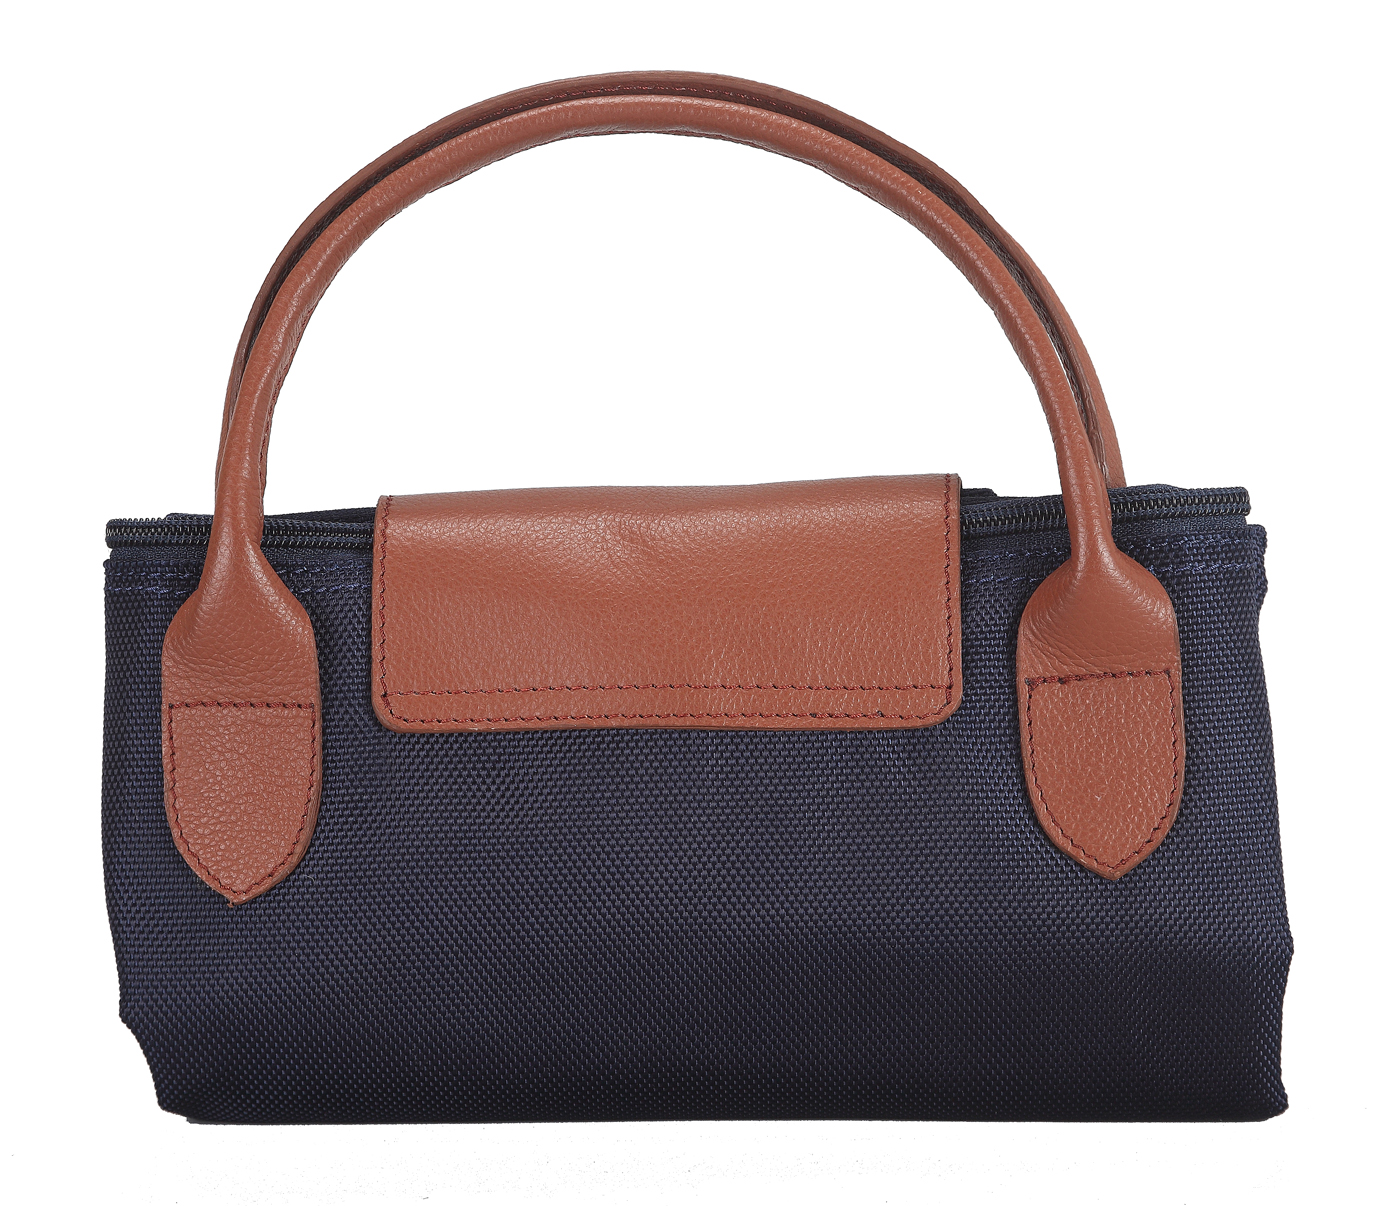 Tote-Valentine-Folding Tote in Tetron Material with Genuine Leather trimmings - Blue